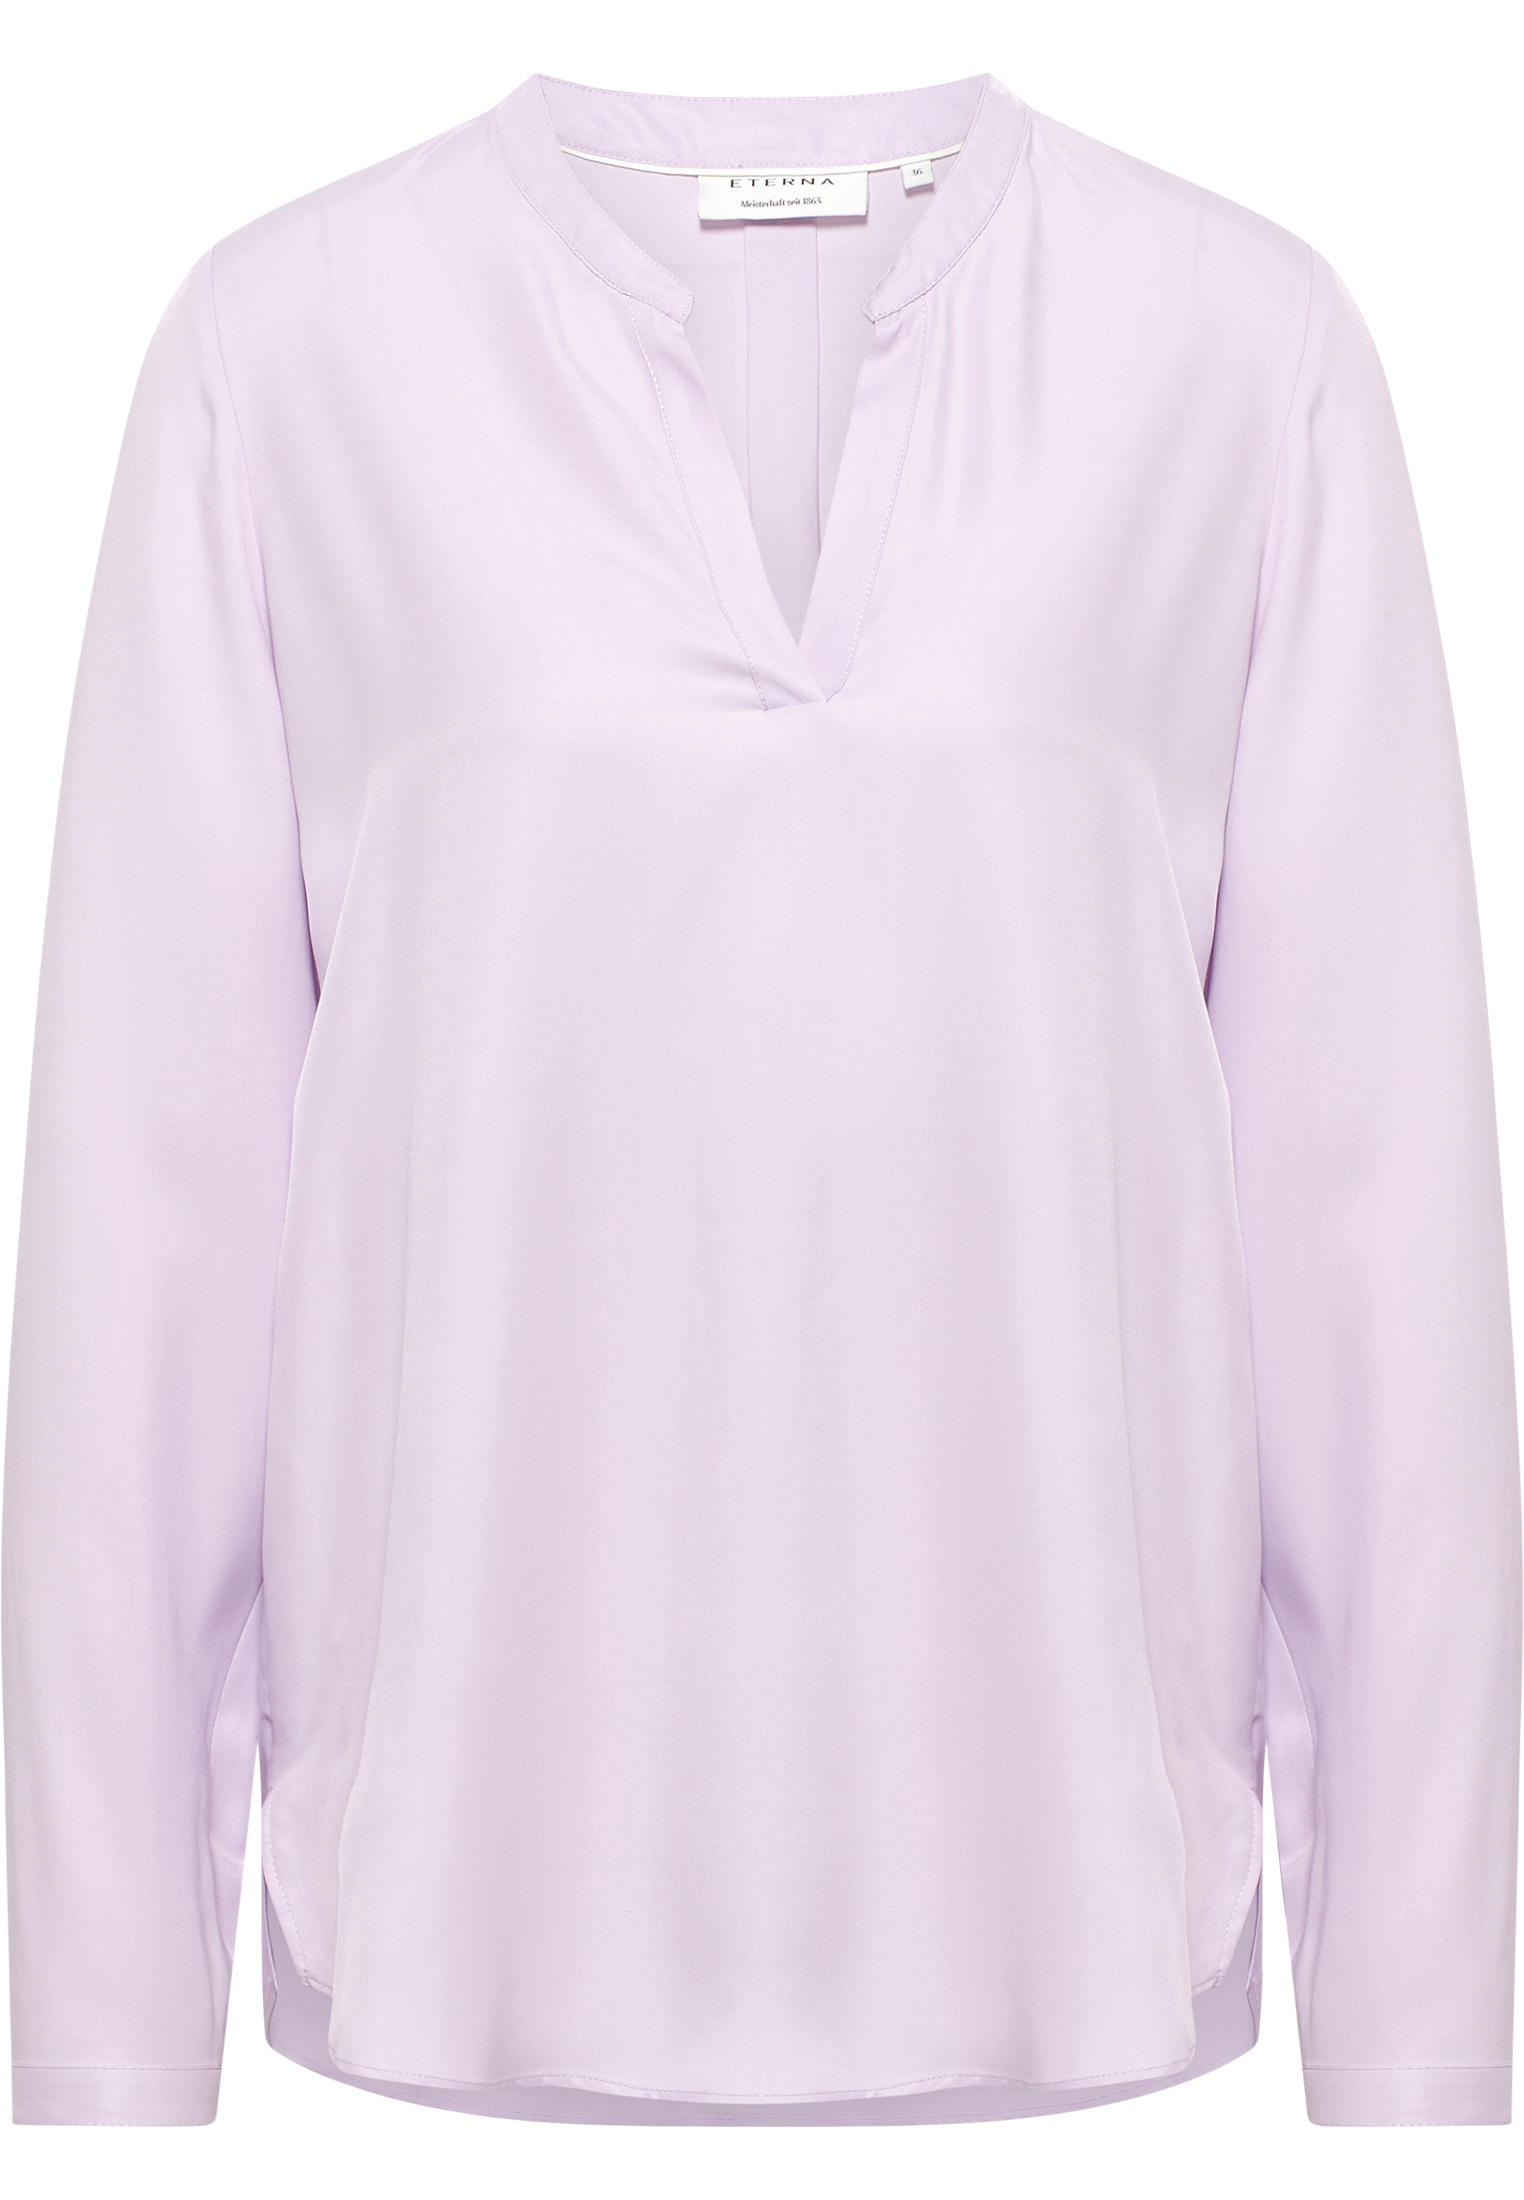 Viscose | unifarben orchid 2BL04297-09-21-48-1/1 48 orchid Bluse Langarm in | | Shirt |